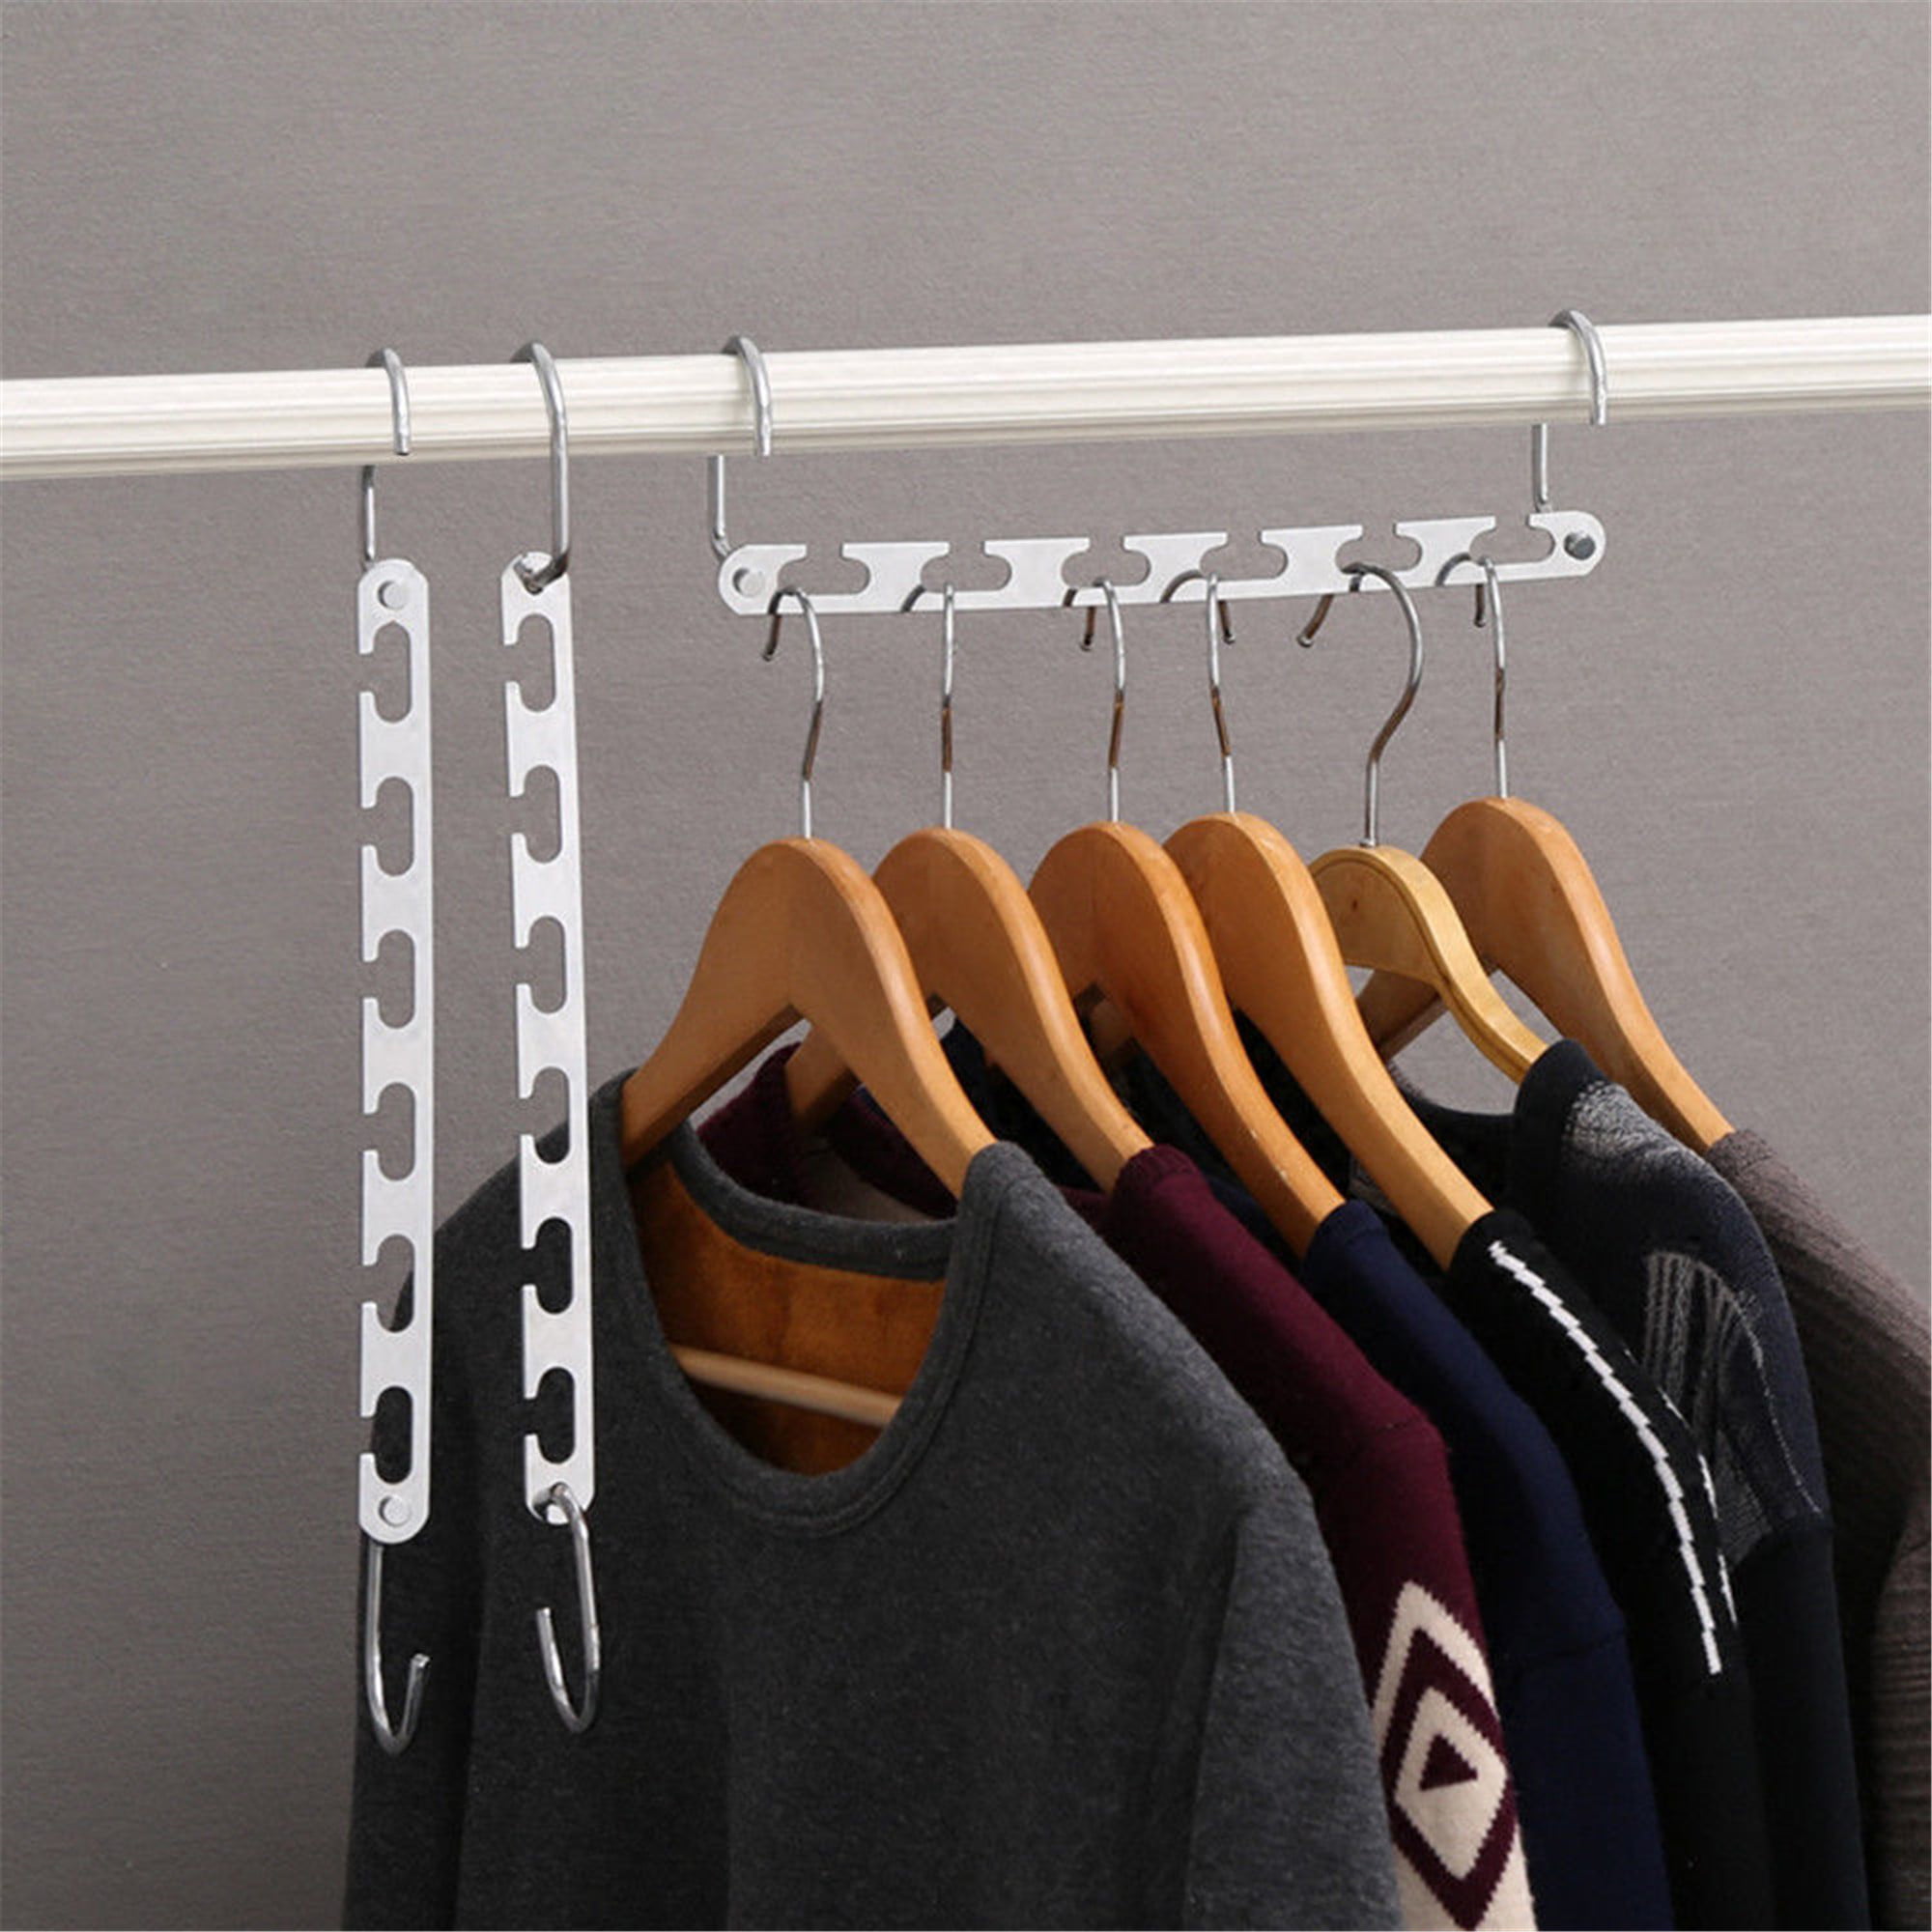 10pc/lot Clothes Hangers Heavy Duty Strong Metal Hangers For Home Closet  Storage Space Saving Suit Hangers For Clothing Storage